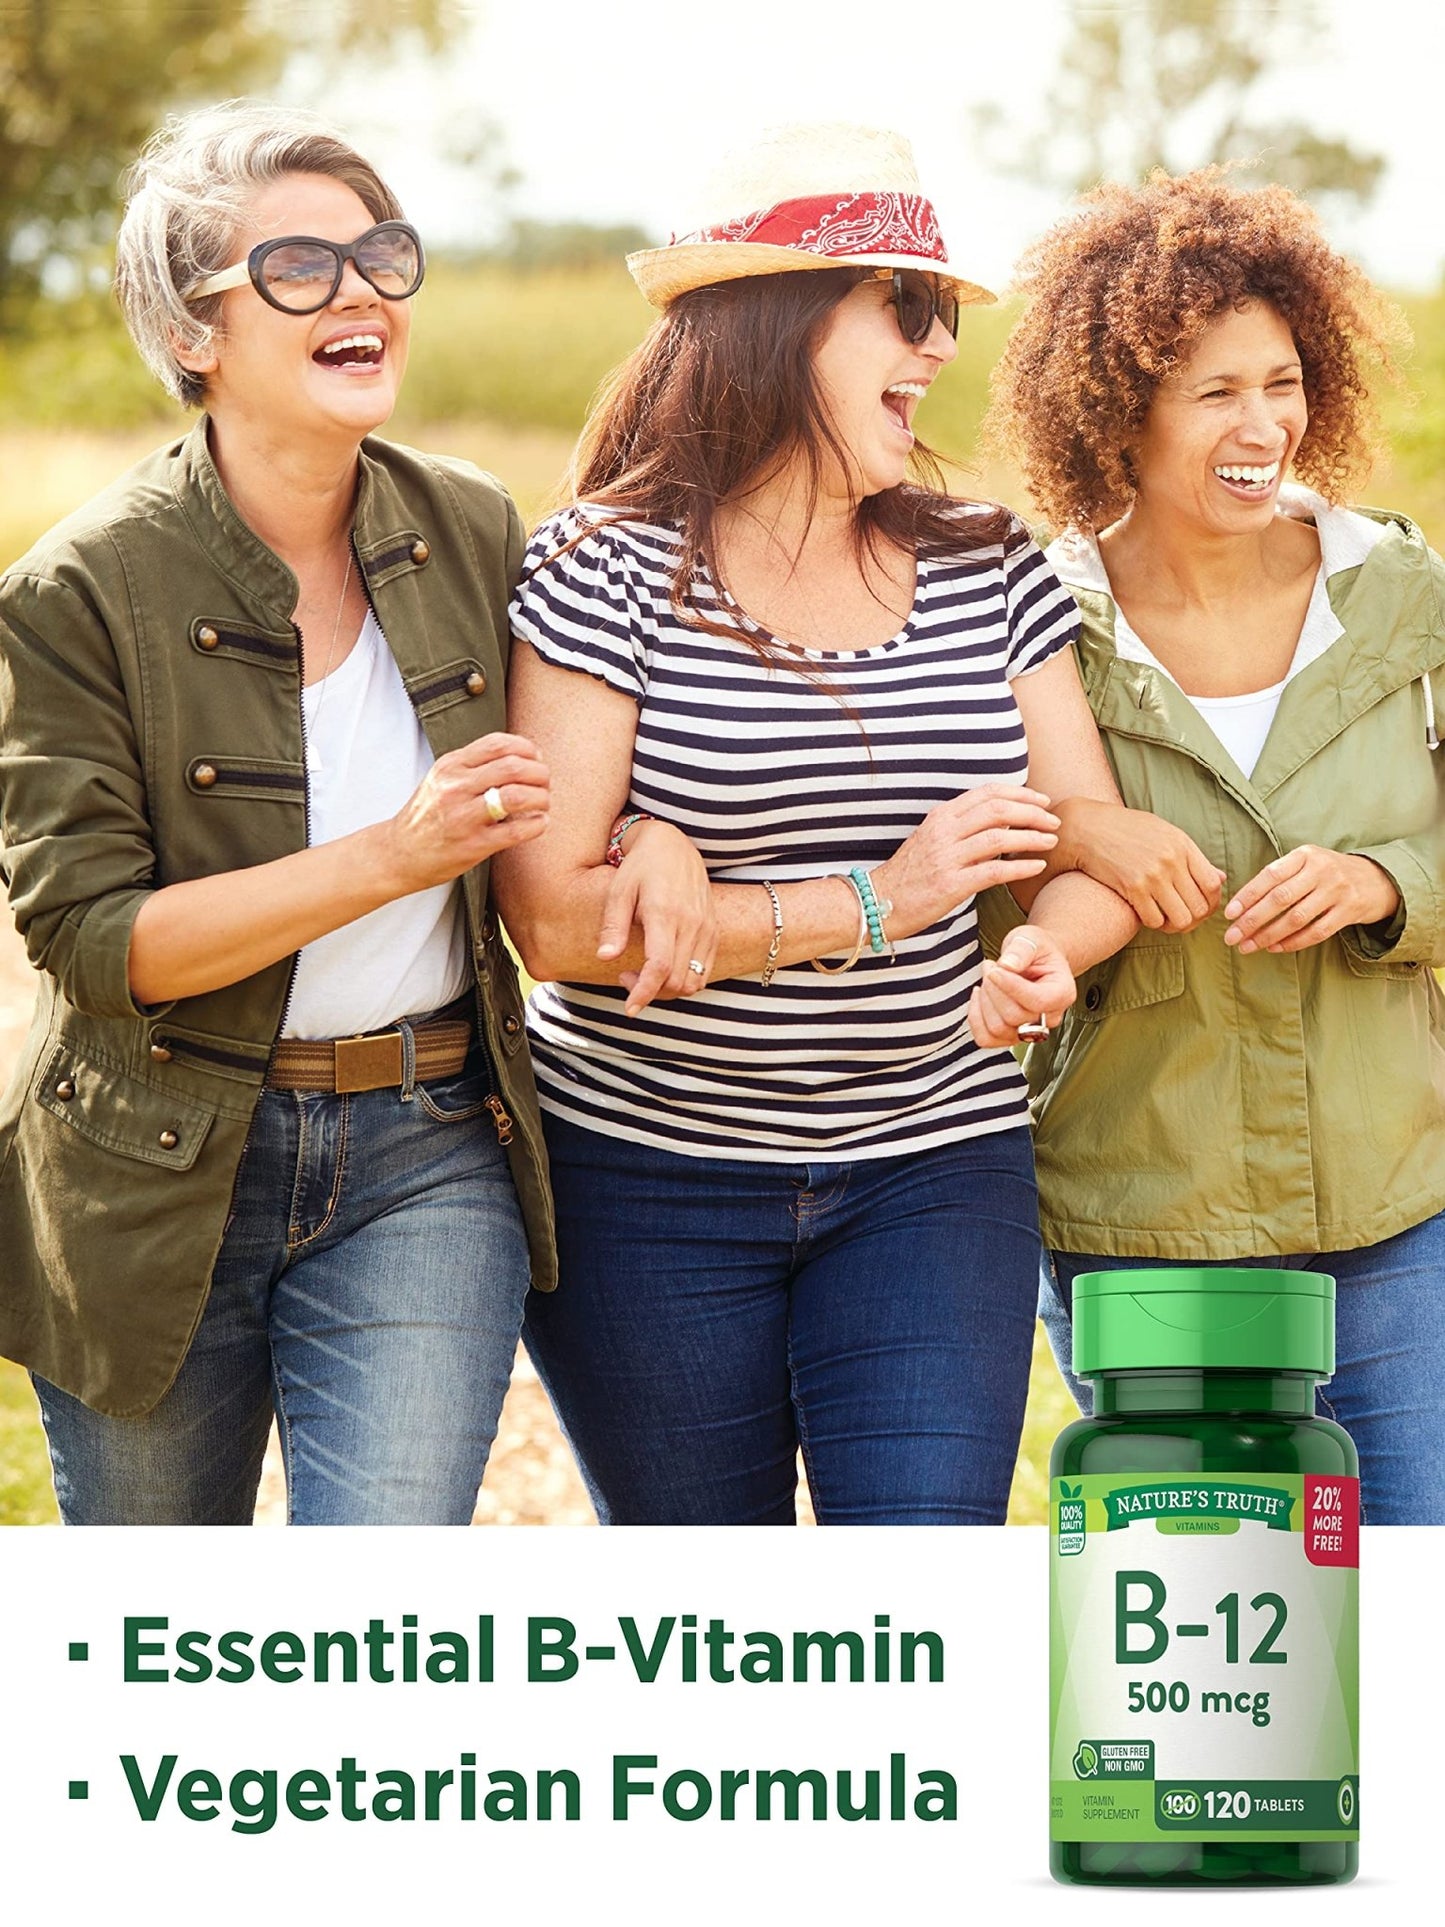 Nature’s Truth B12 Vitamin 500 mcg | 60 Tablets Exp 11/2026 - Ome's Beauty Mart